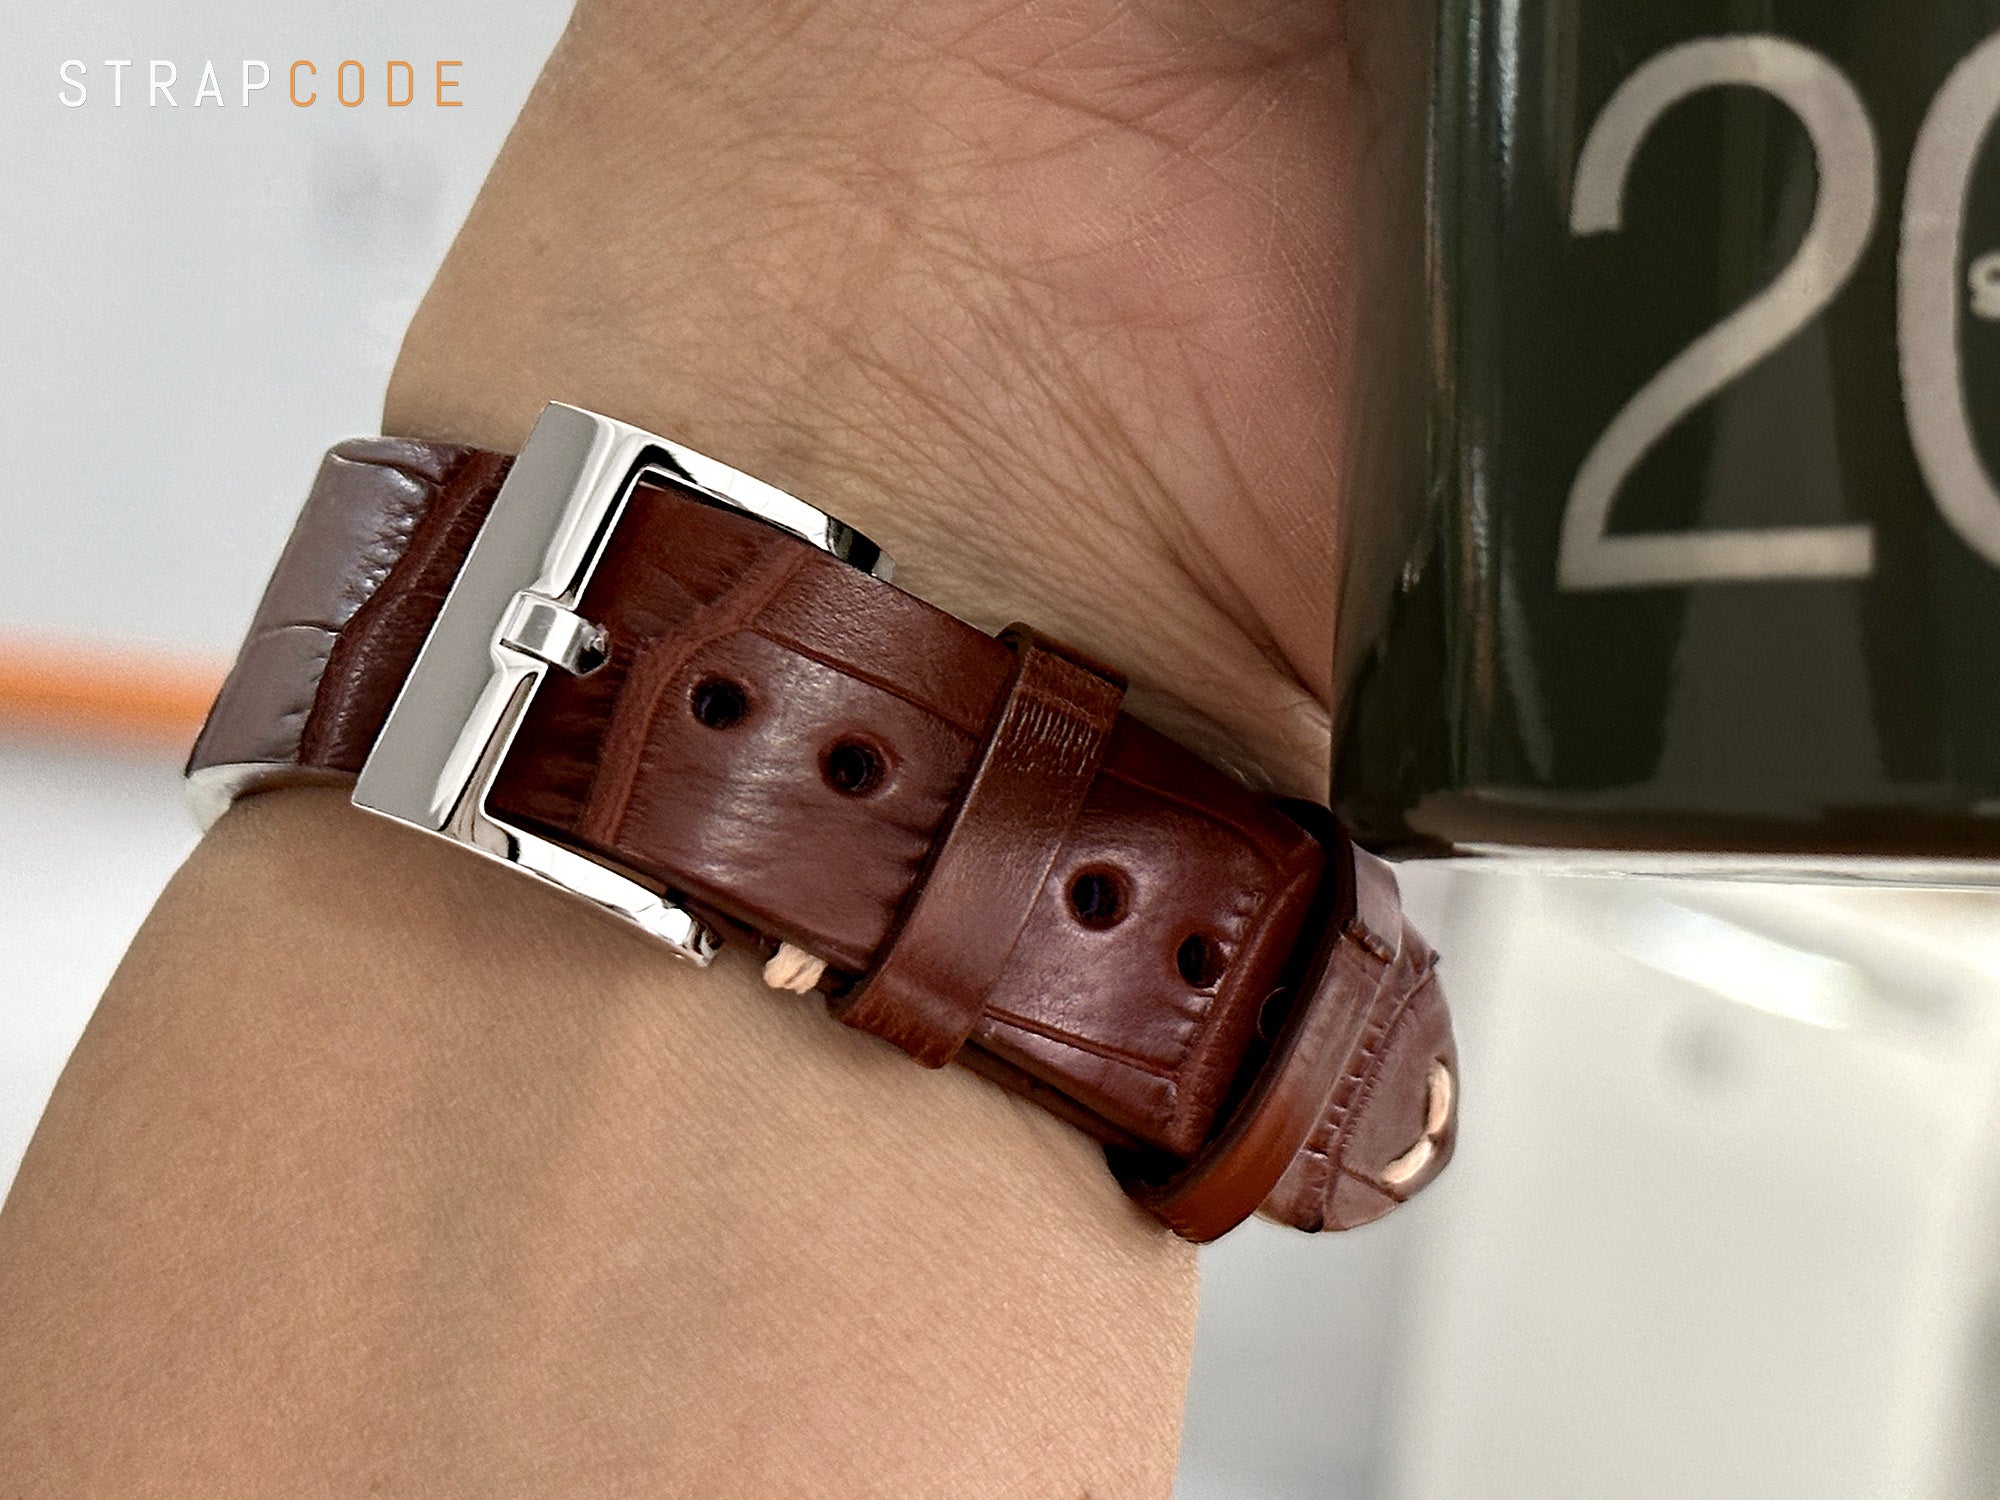 Casual / Military watch Buckle for Leather watch band by Strapcode